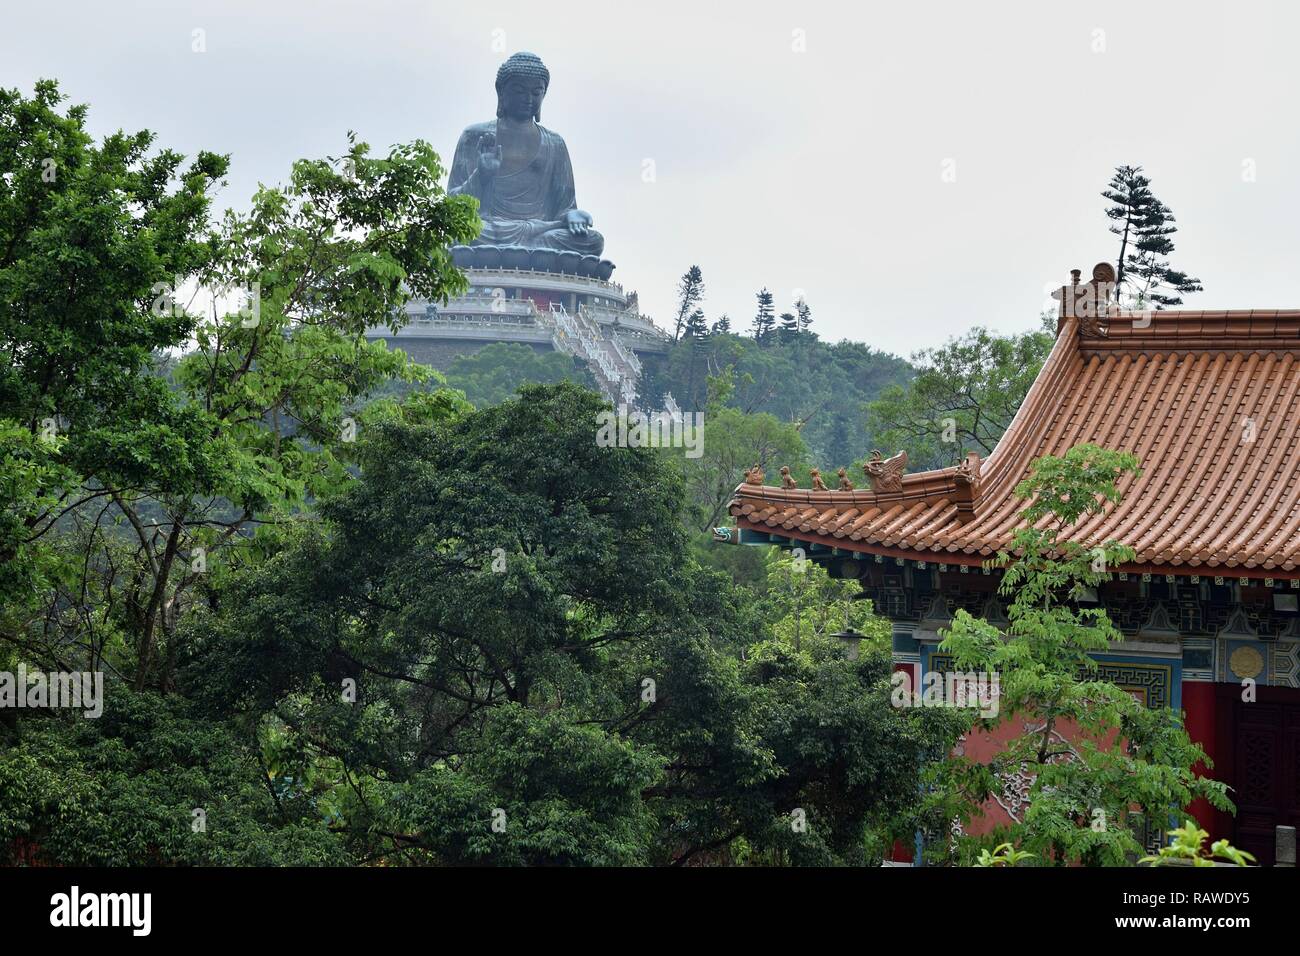 The landscape of Lantau Island in Hong Kong with the Tian Tan Buddha also known as Big Buddha in the background. Stock Photo